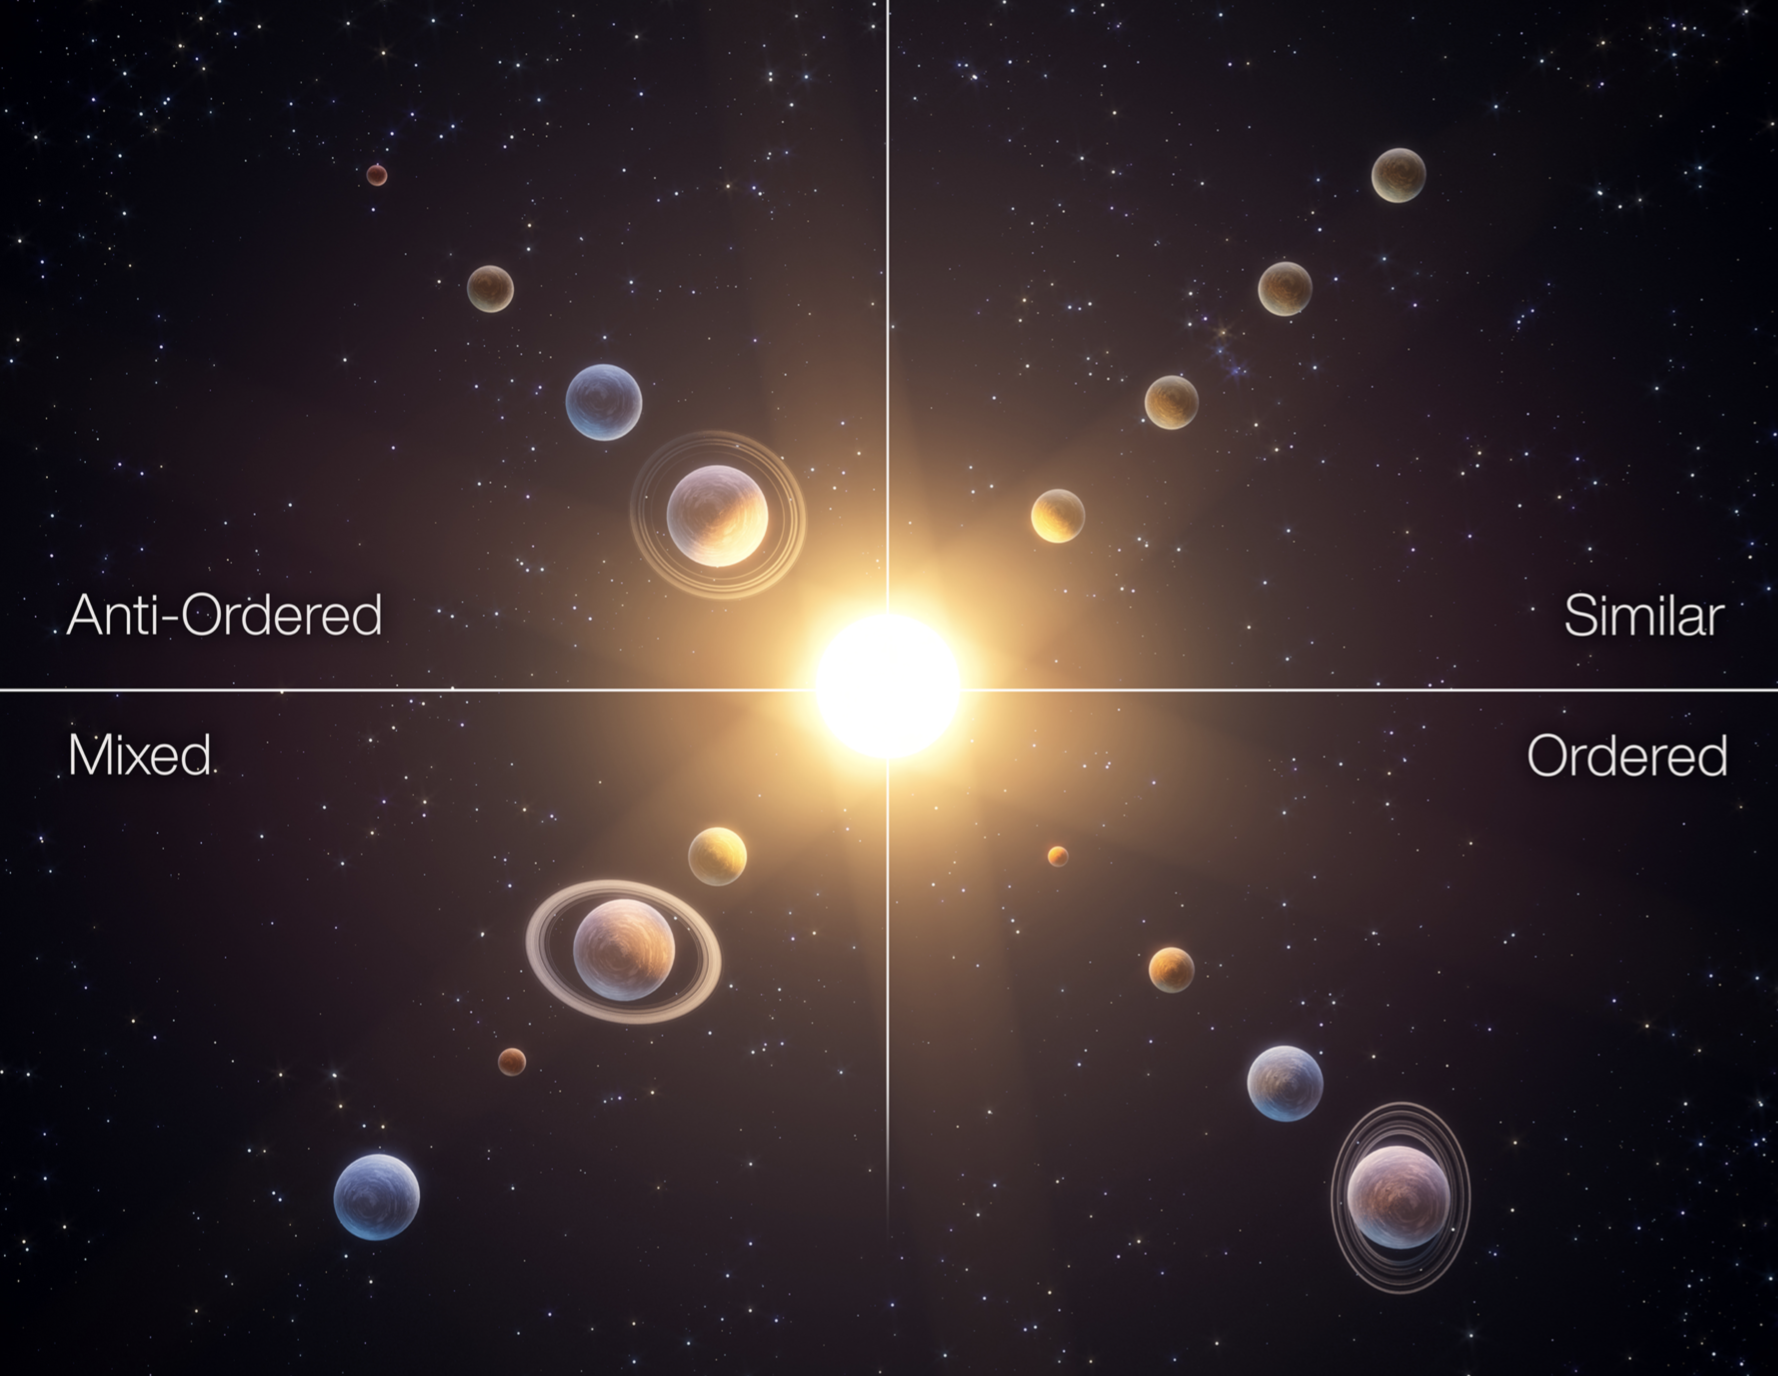 Of 4 types of planetary systems, ours is rarest